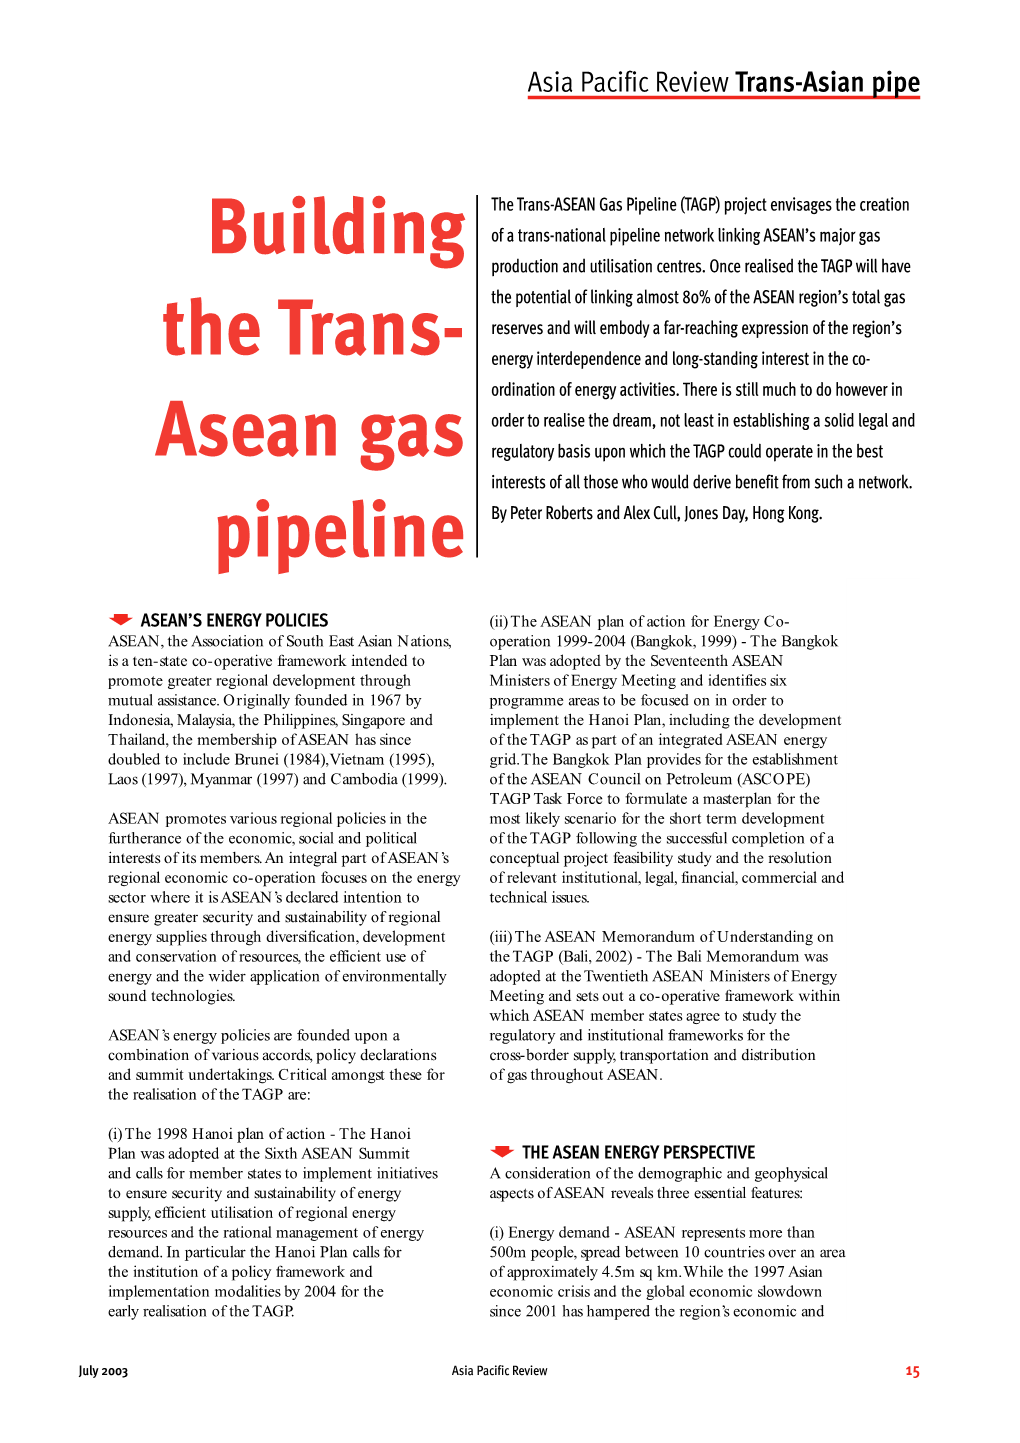 Building the Trans- Asean Gas Pipeline